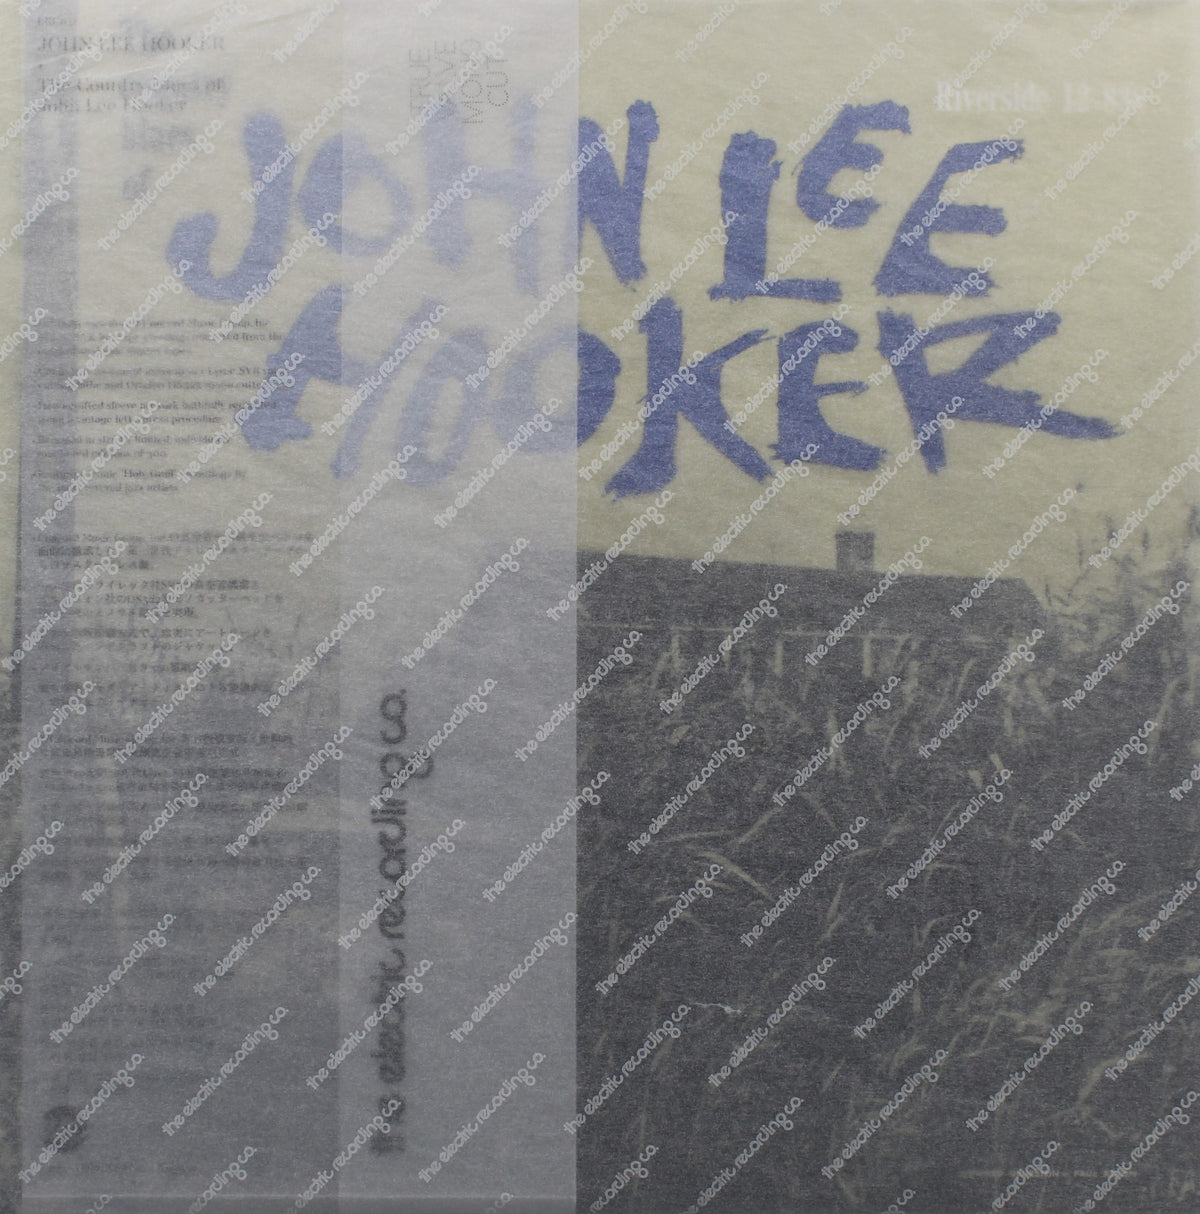 John Lee Hooker – The Country Blues Of John Lee Hooker, Vinyl, LP, Album, Limited Edition, Numbered, Reissue, Blues, The Electric Recording Co!, UK 2019